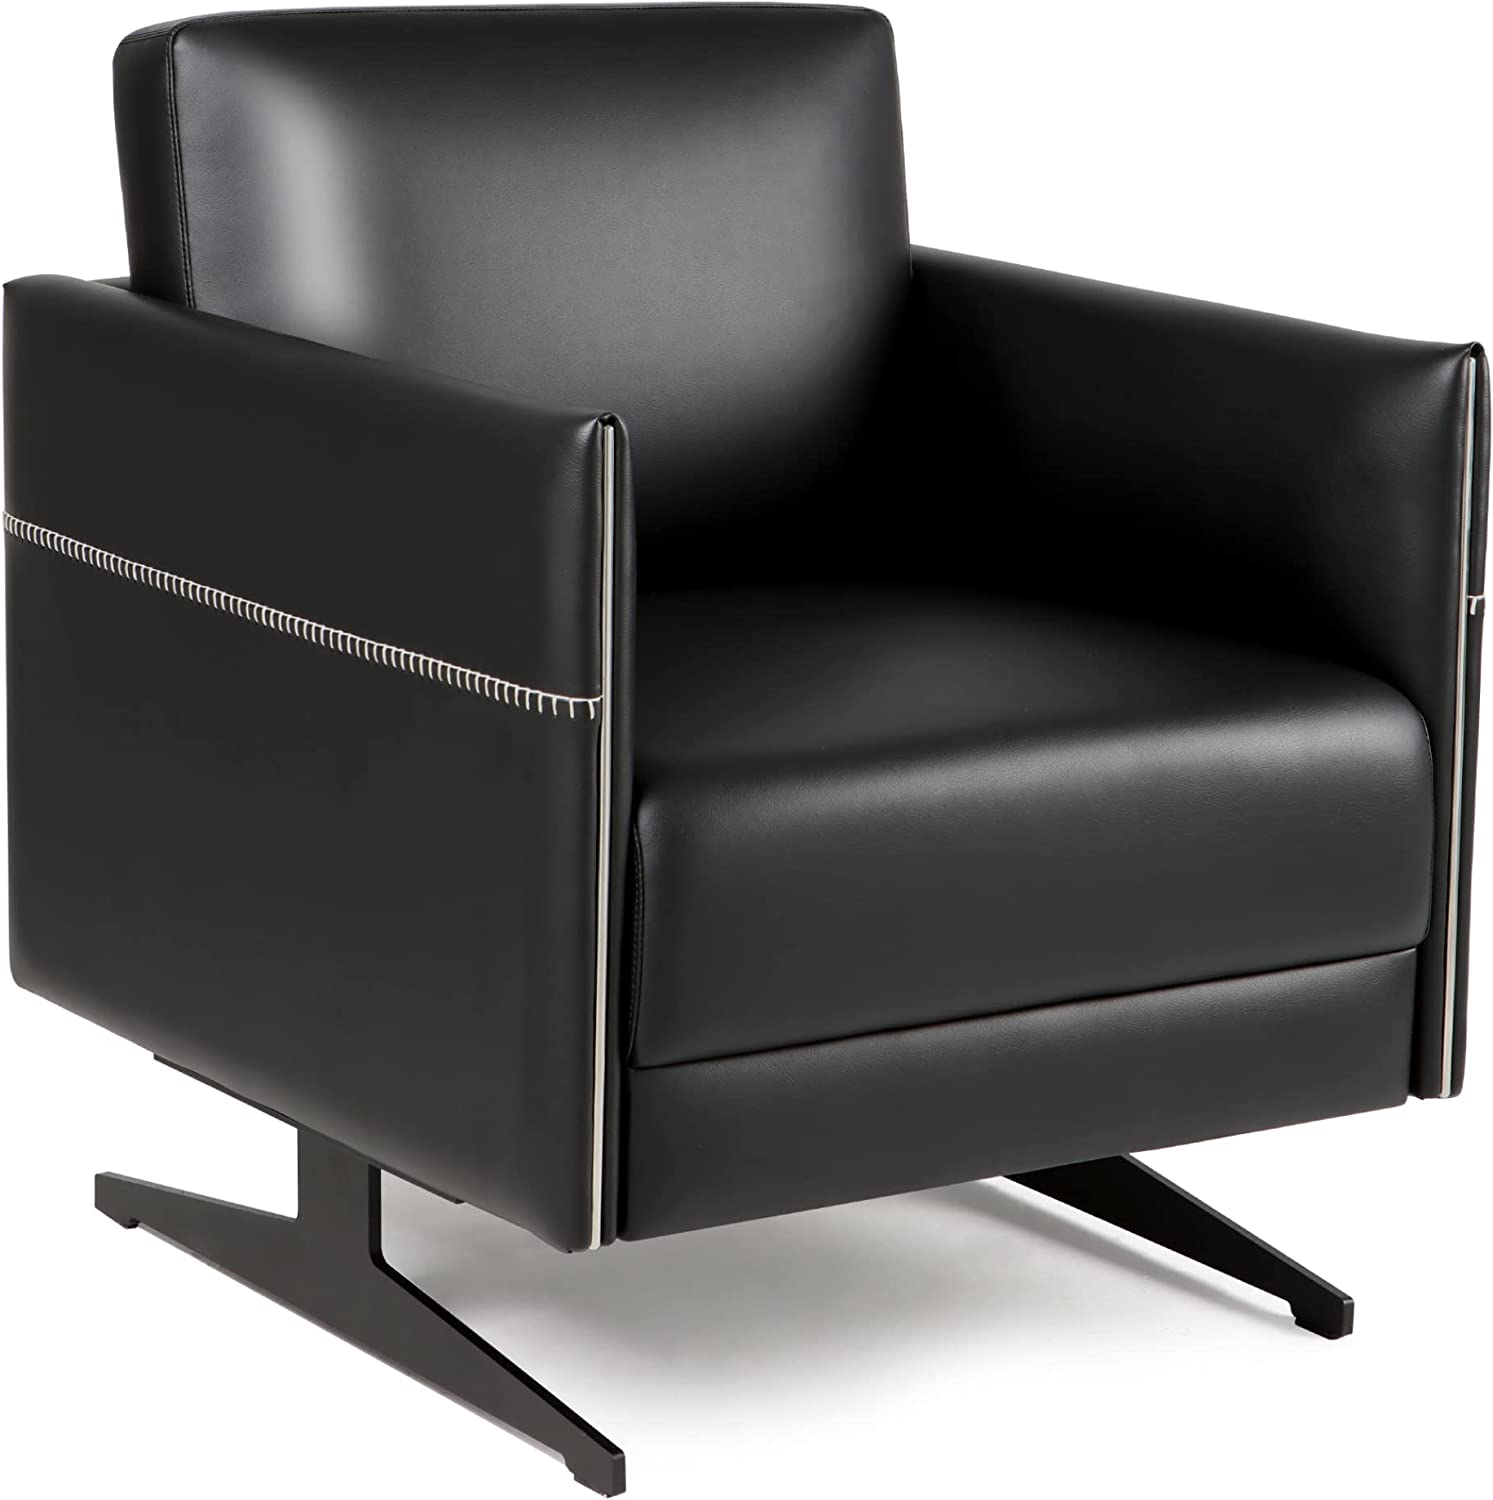 (Out of Stock) Modern Single Sofa Upholstered Faux Leather Accent Living Room Leisure Chair with Armrest, Black